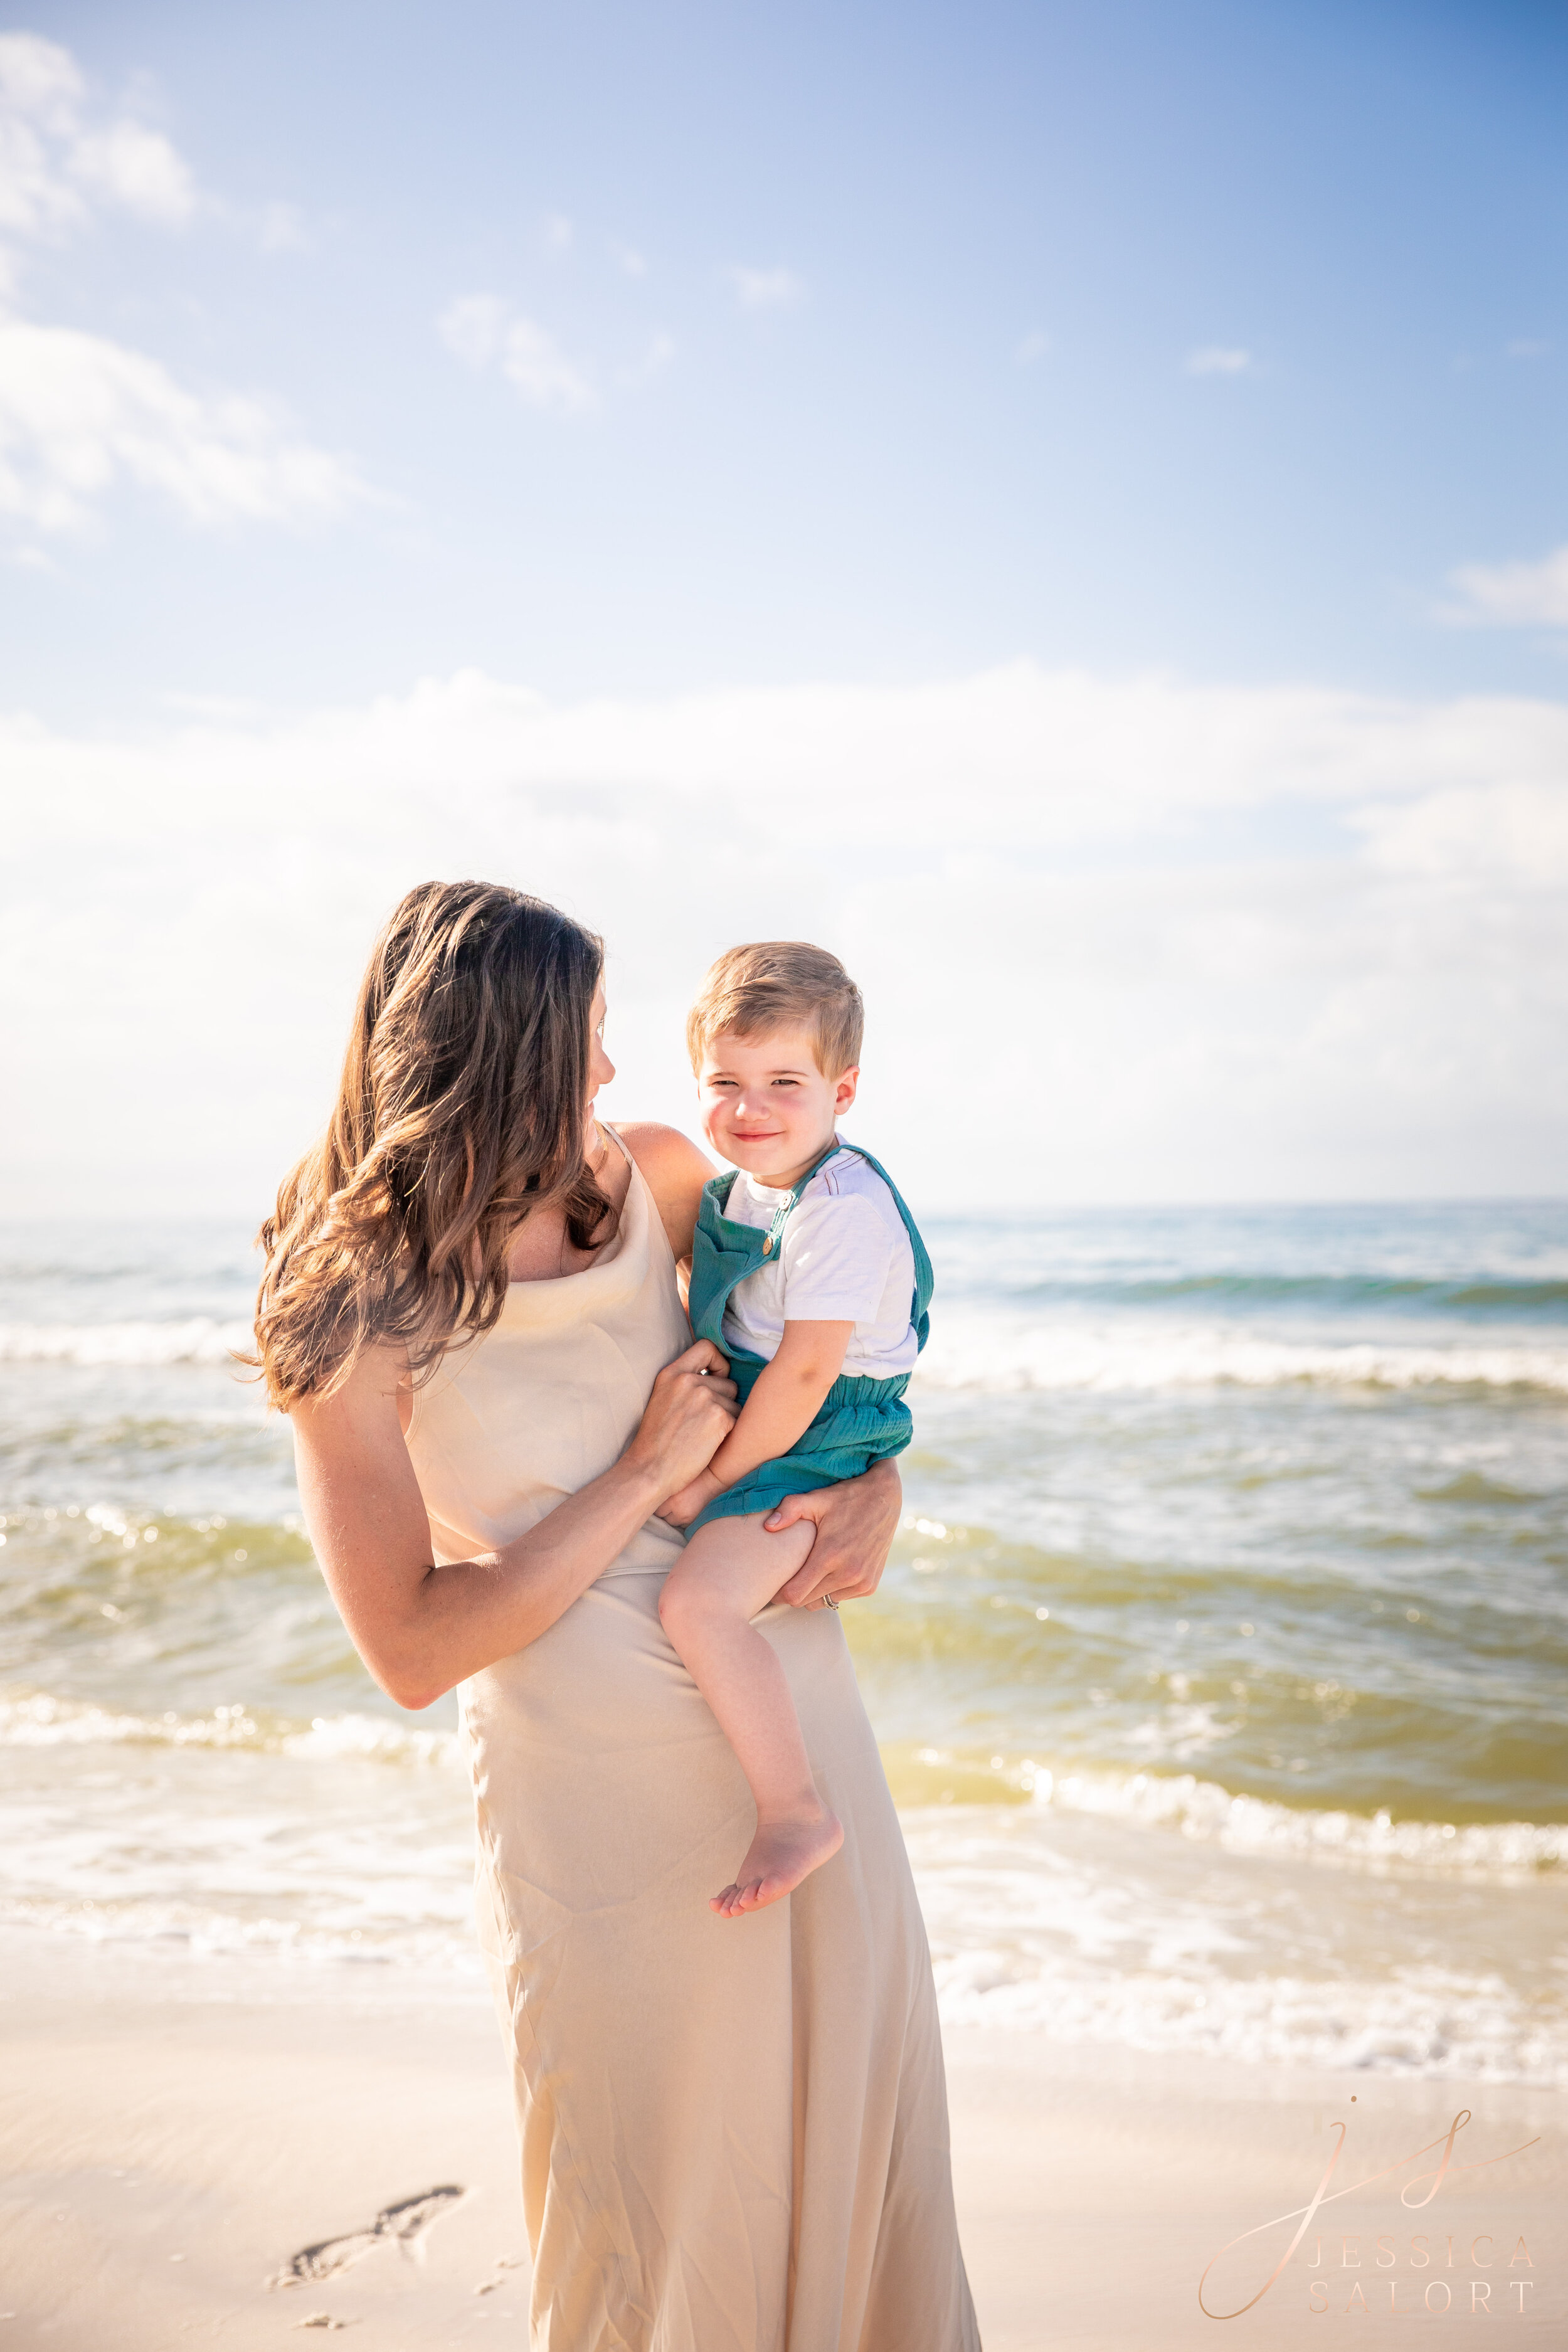  Jessica Salort Photography combines her love for creative and emotional storytelling with traditional portraiture. Her style could be described as timeless and true to life color.  Jessica Salort is based out of Navarre Beach, FL and travels all alo